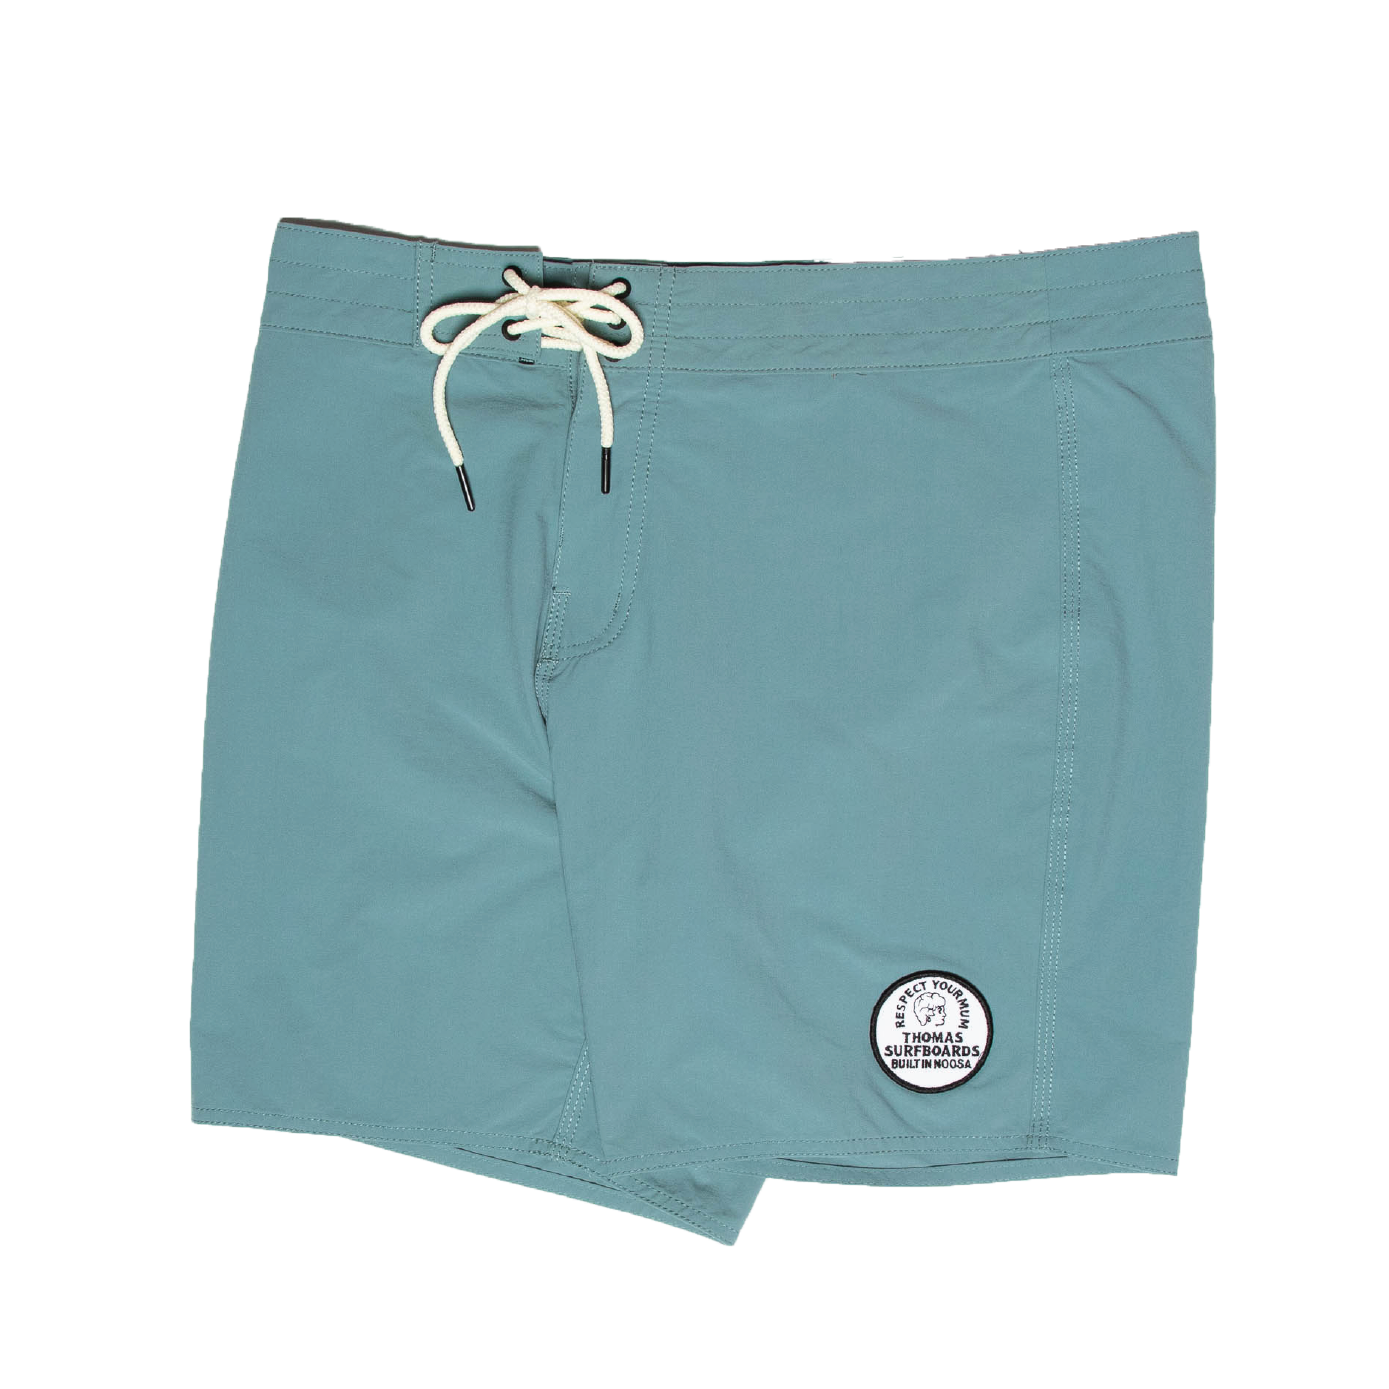 The Tom Teal Board Shorts